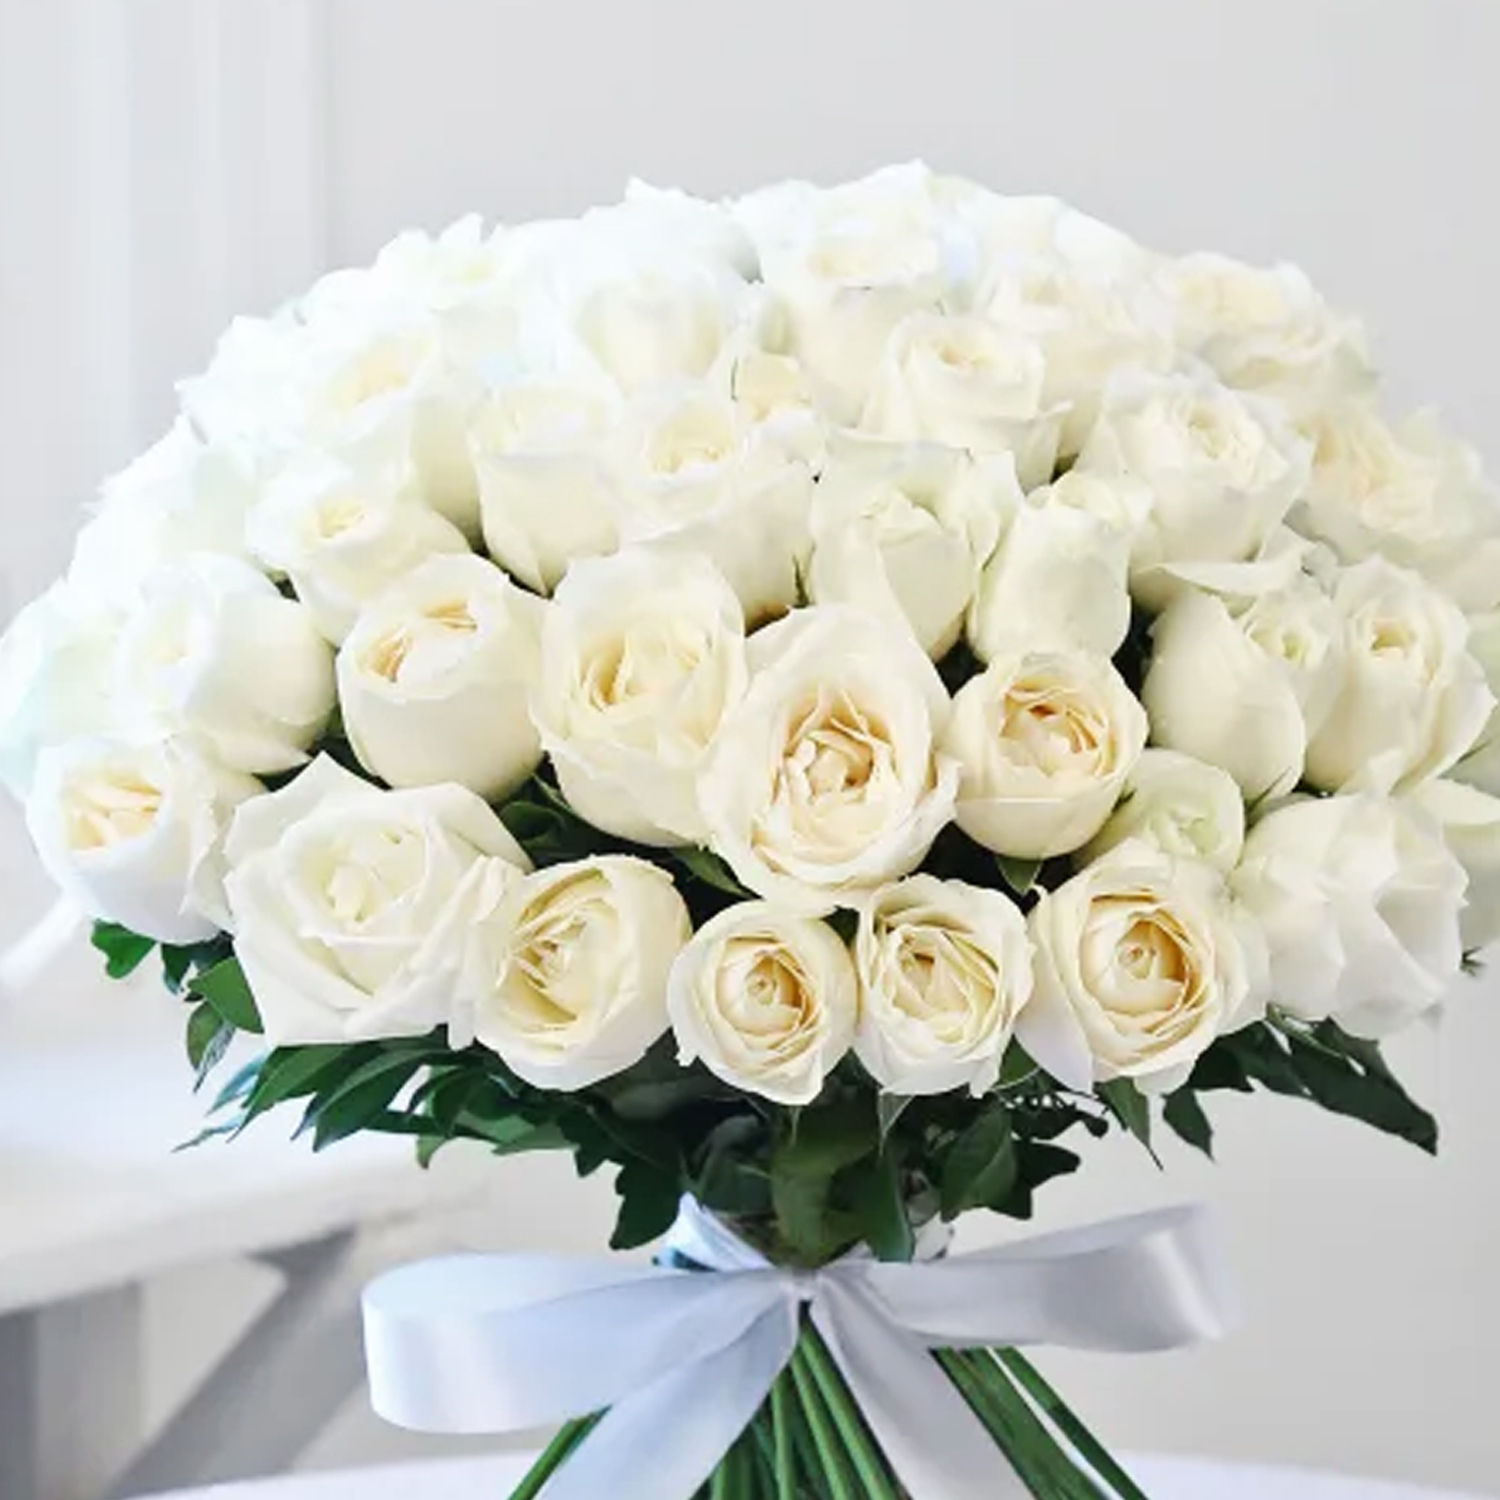 Online White Roses Bunch and Ferrero Rocher Gift Delivery in UAE - FNP